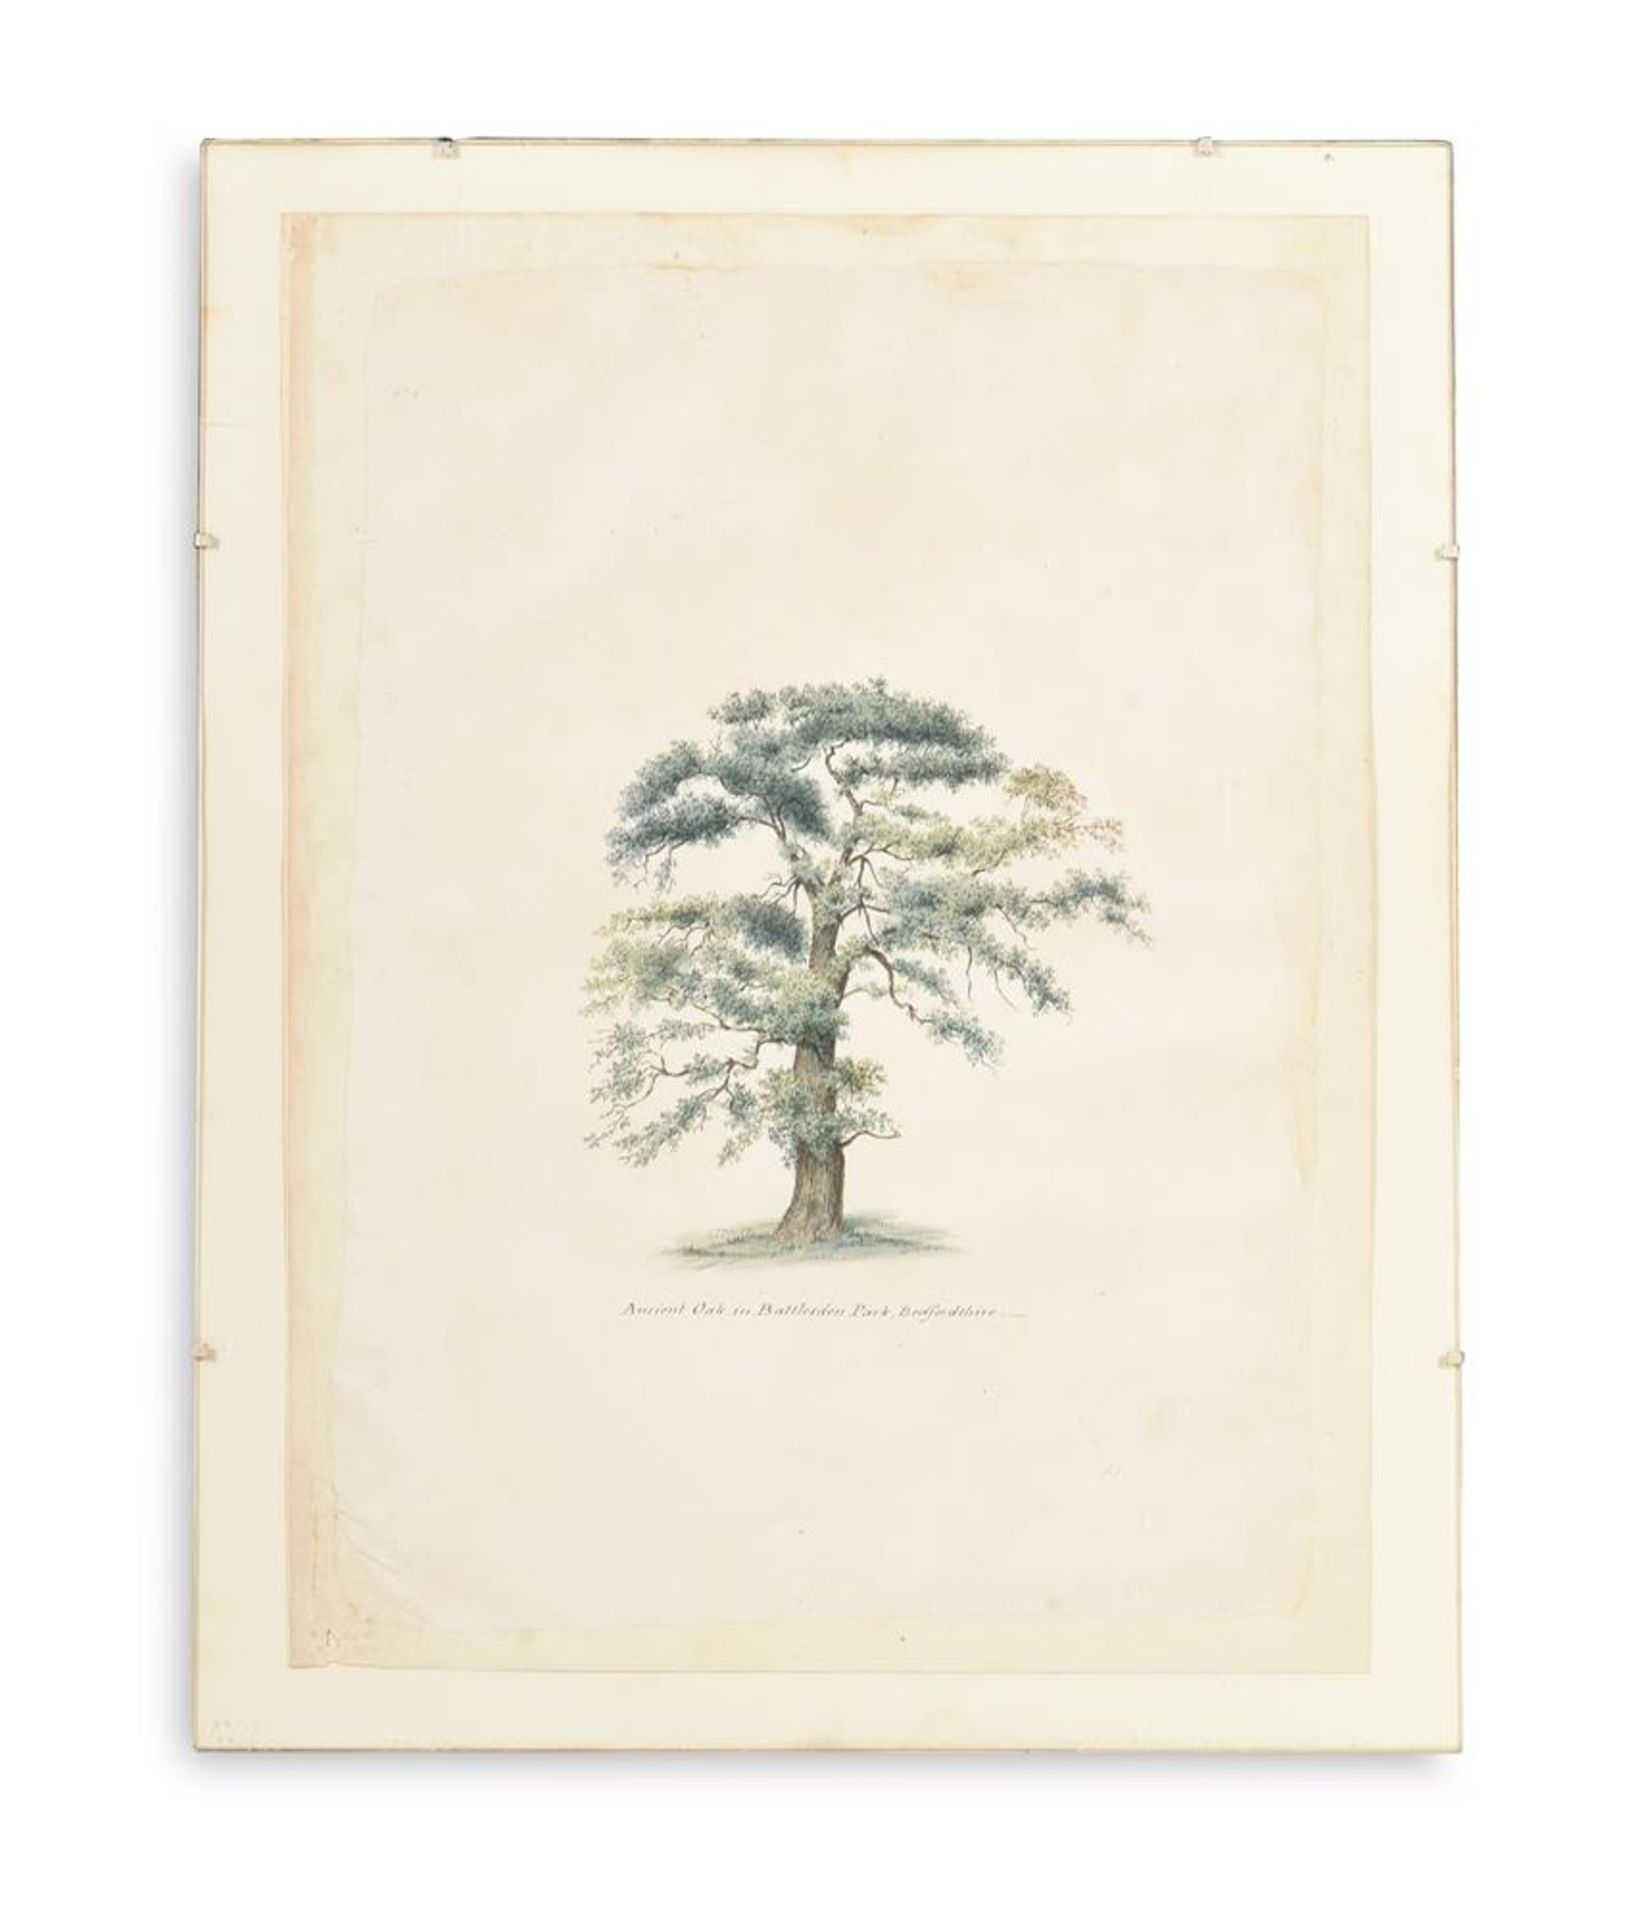 ENGLISH SCHOOL (19TH CENTURY) ELEVEN STUDIES OF TREES AND THE GROUNDS OF BATTLESDEN - Image 11 of 12